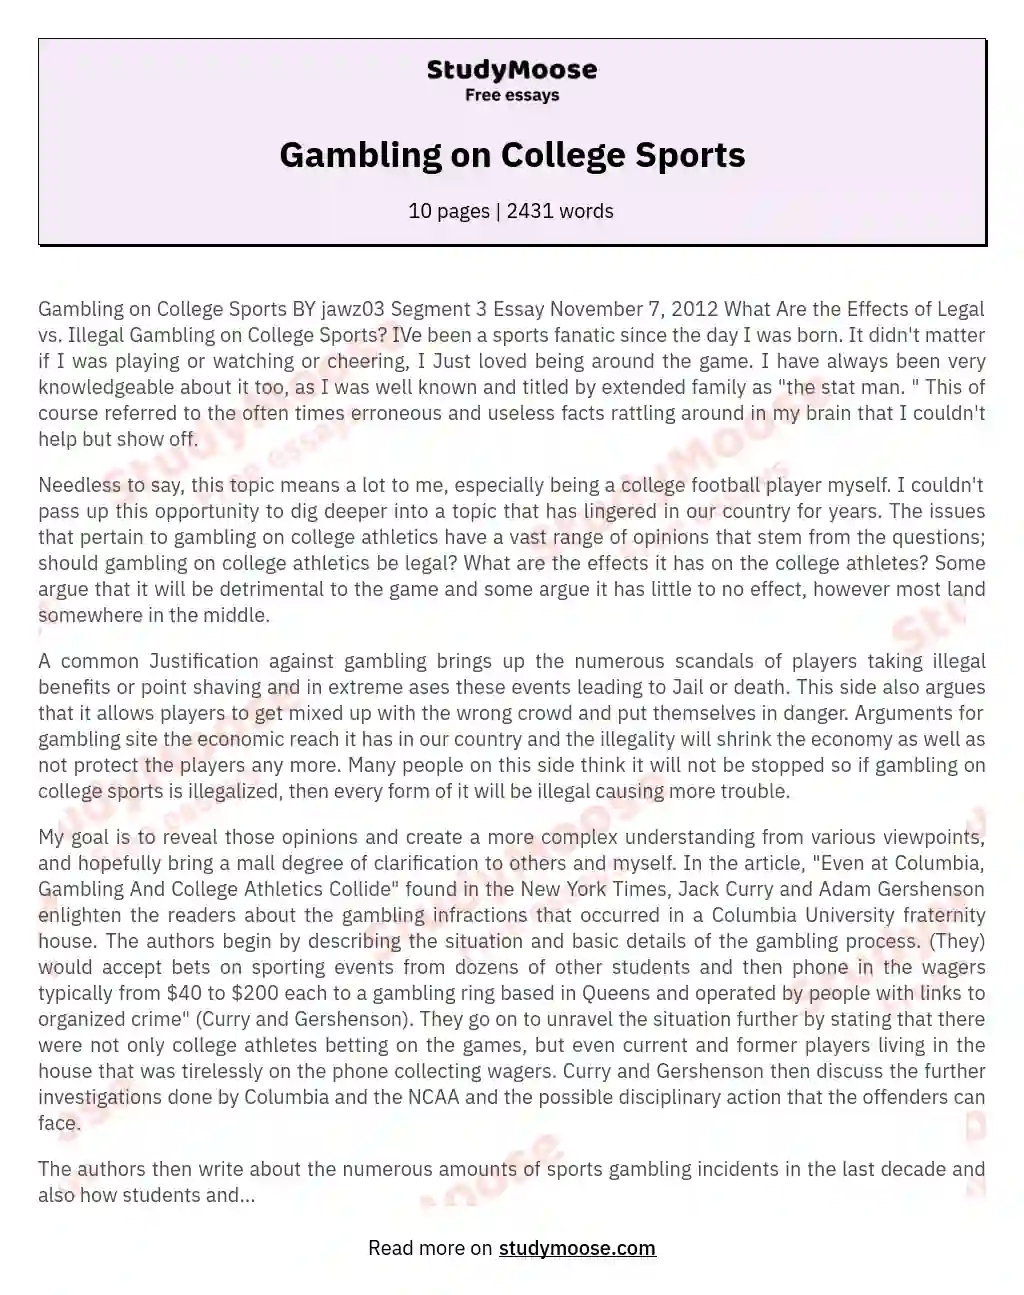 Gambling on College Sports essay